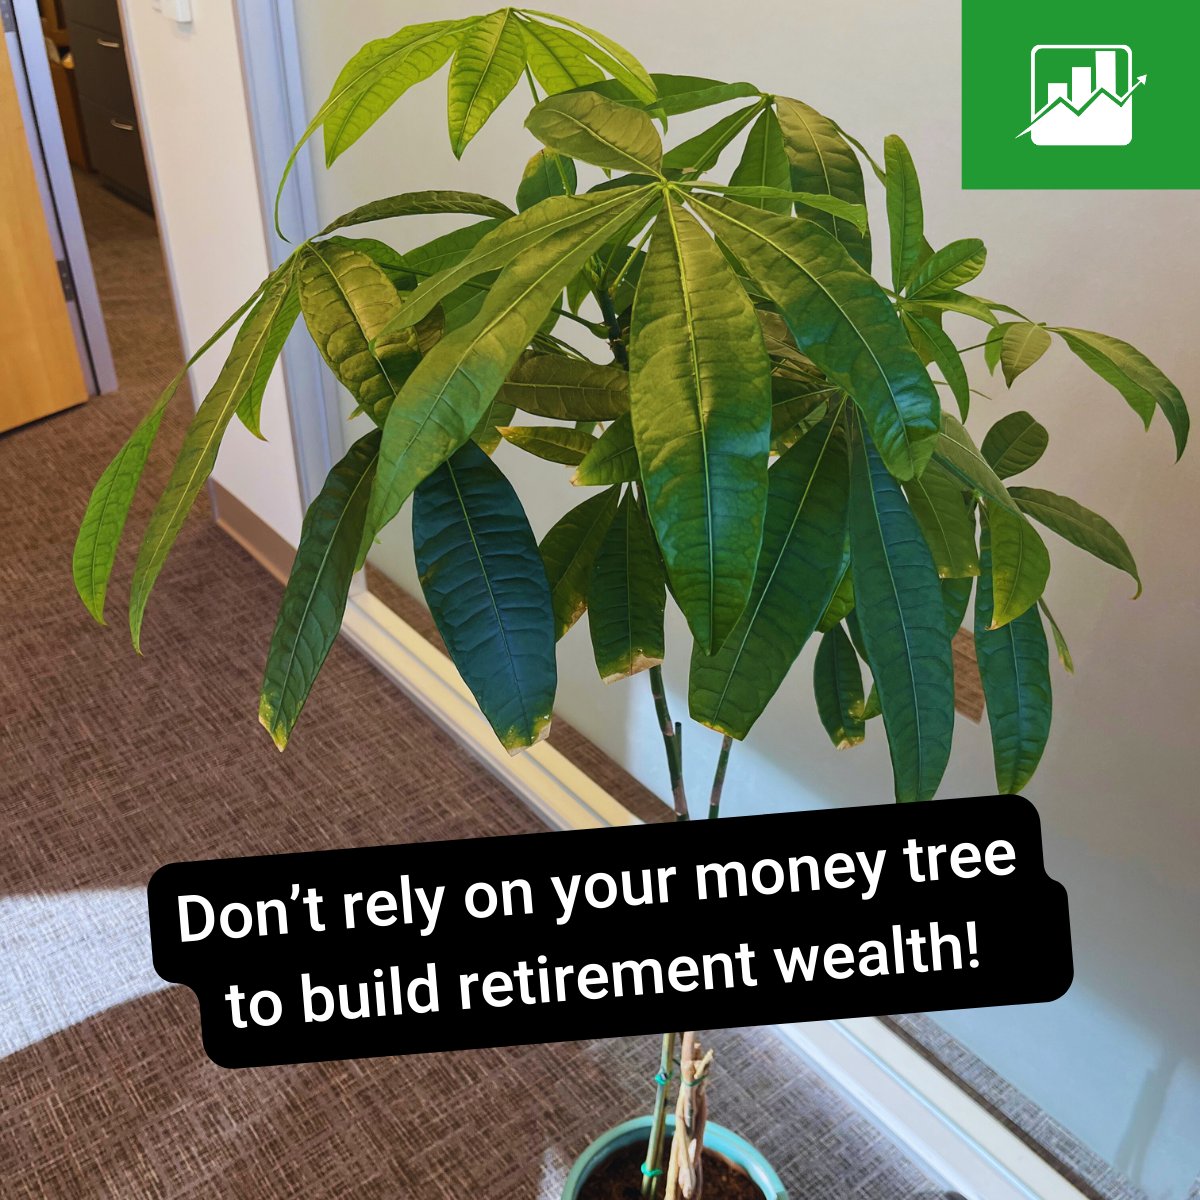 Don't wish on a leafy dream, self-direct your IRA for a secure retirement. Visit our website for more info: hubs.ly/Q02vcVcL0 #iraresources #moneytalk #selfdirected #SDIRA #IRAR